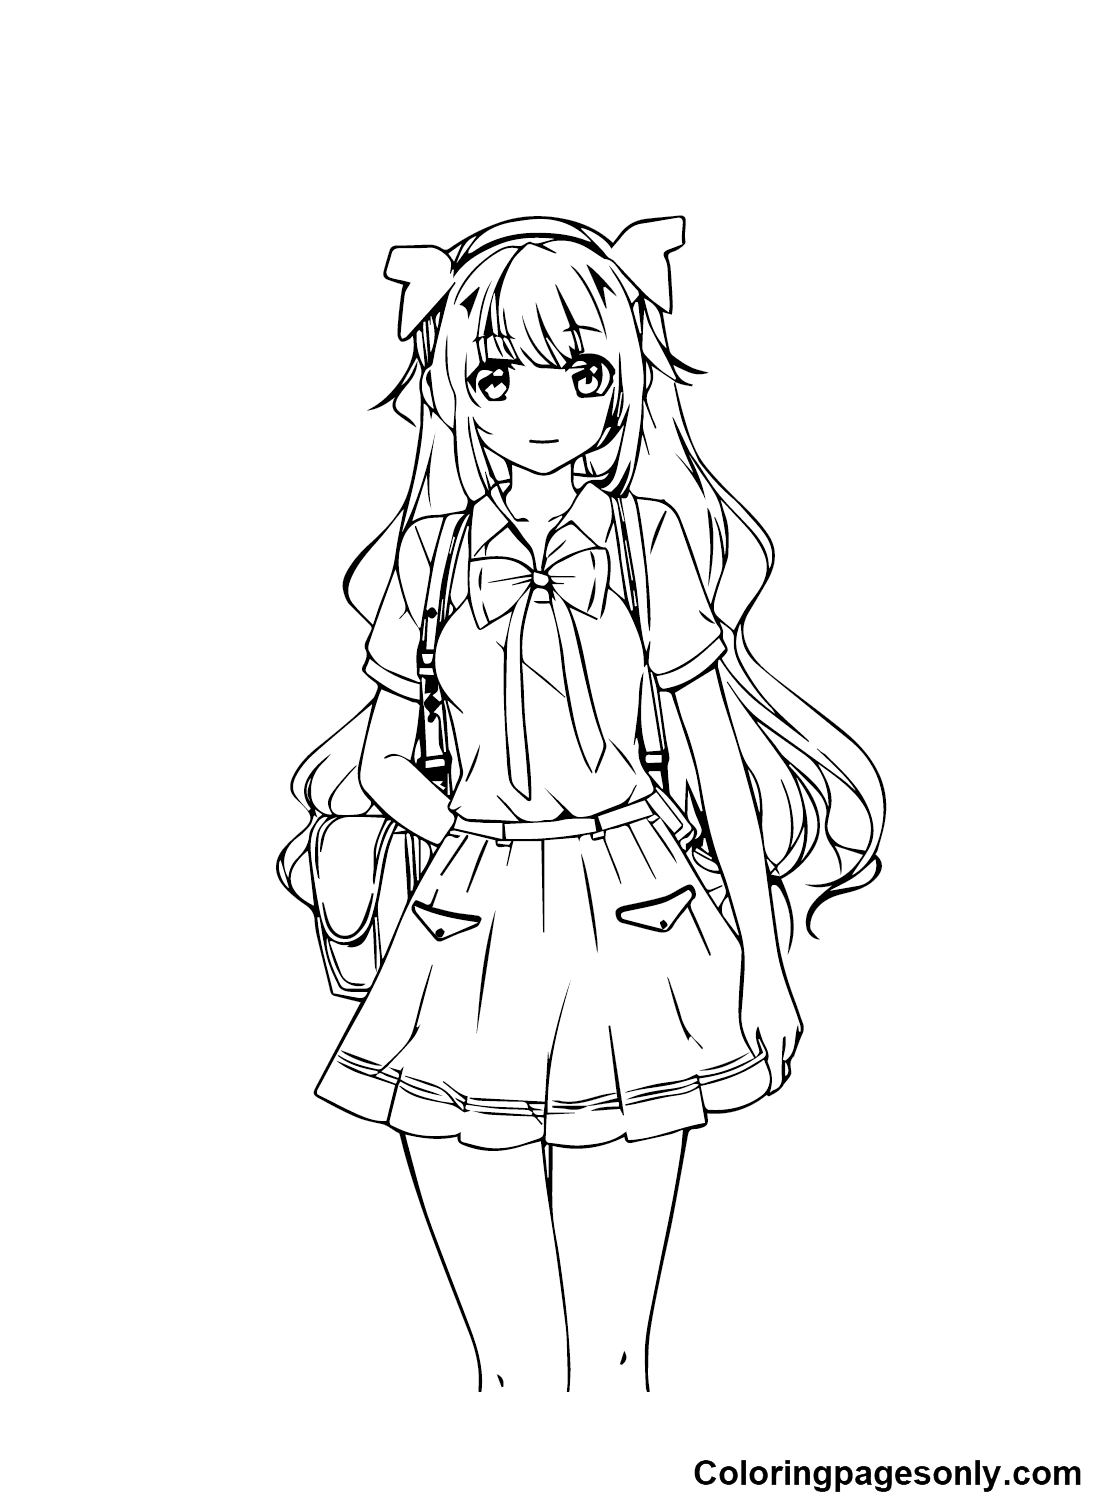 Cute Anime Girl Coloring Pages Easy - Pluscoloring.com